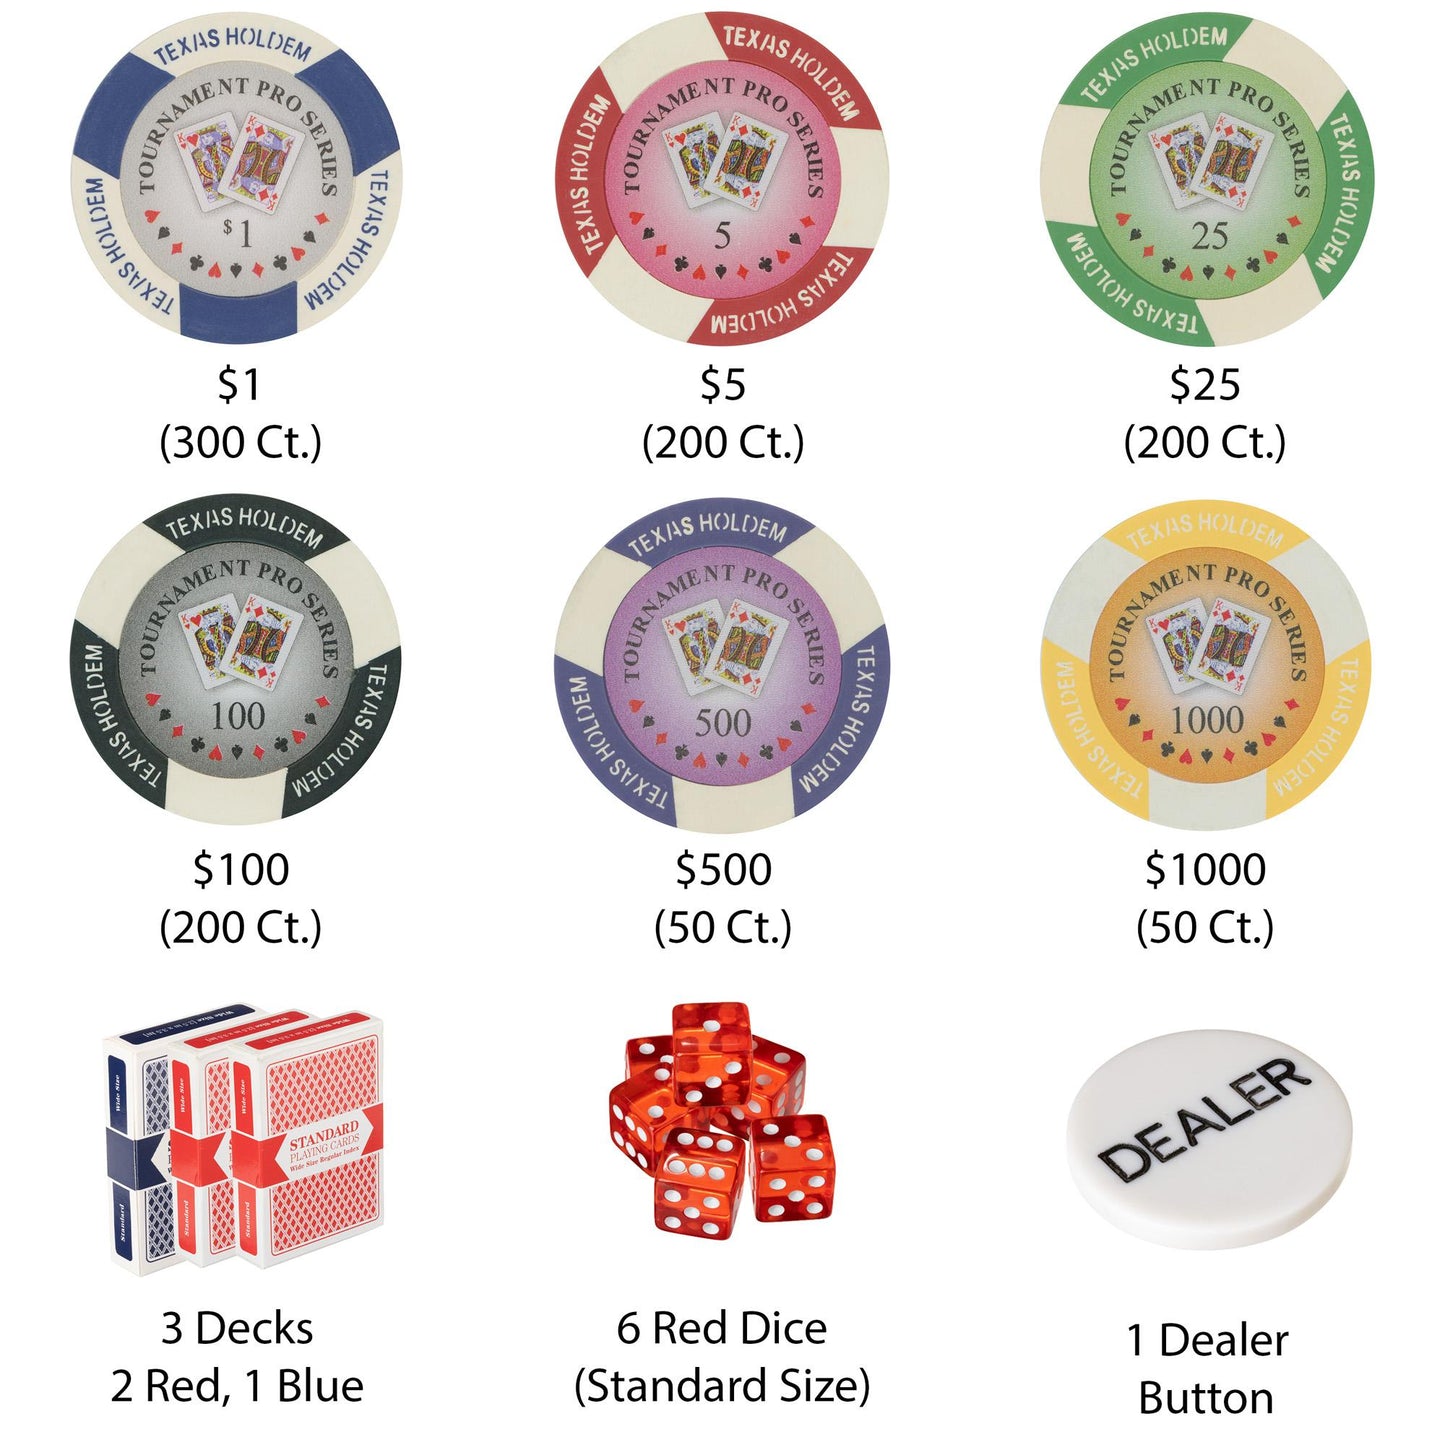 1000 Tournament Pro Poker Chips with Aluminum Case